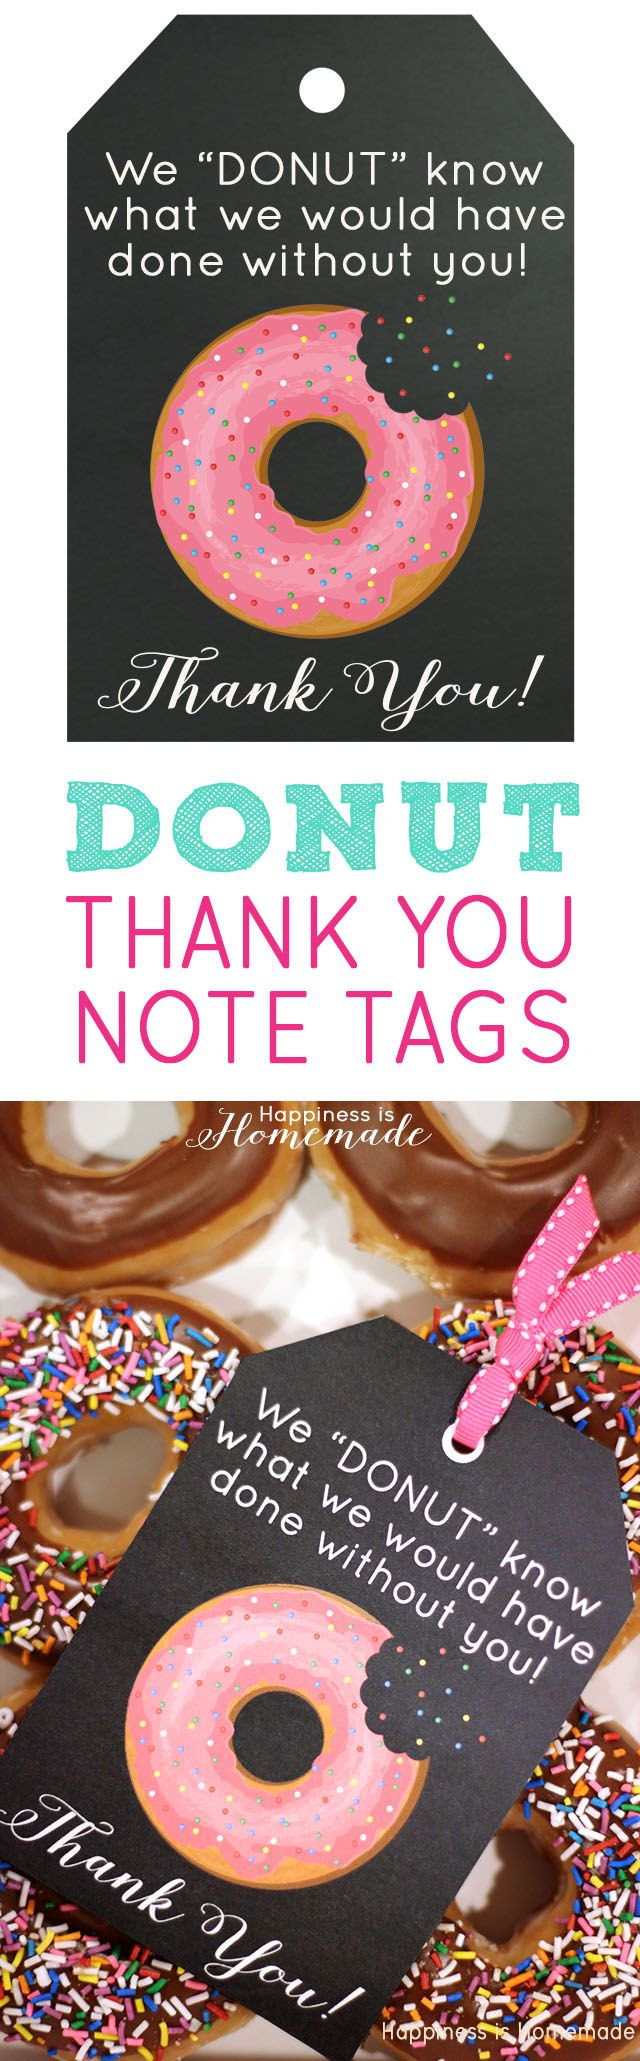 Employee Thank You Gift Ideas
 1743 best Free Printables images on Pinterest